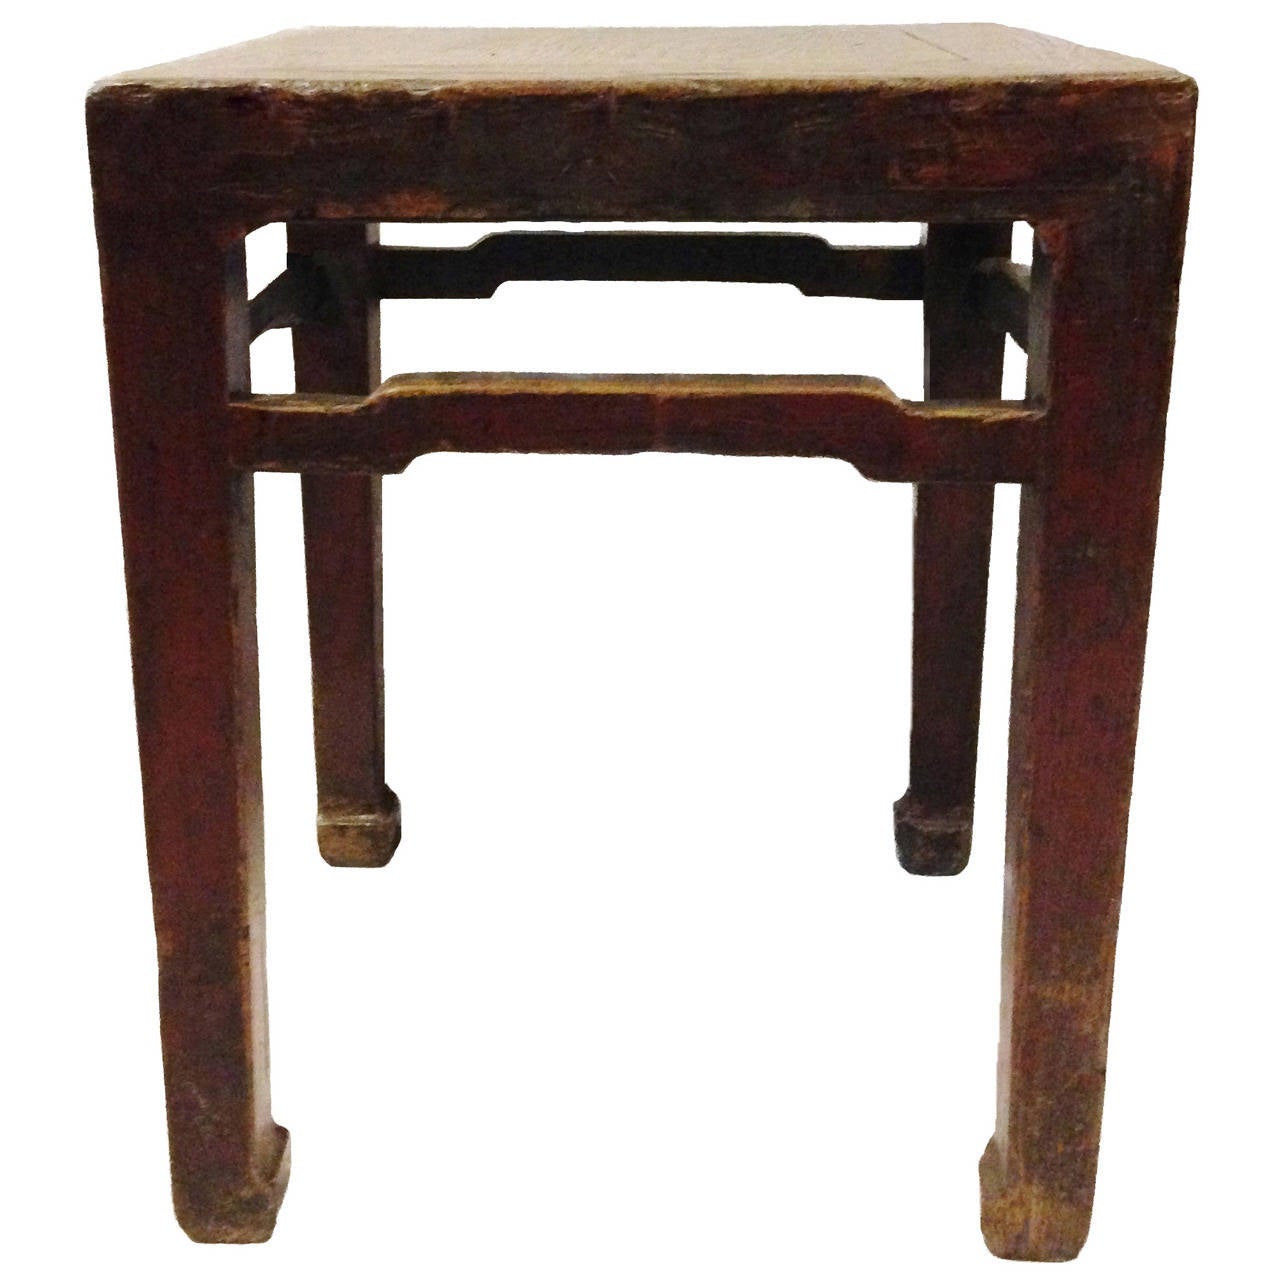 This beautiful stool was designed in the classic Ming style. Featuring hoof legs and raised stretchers, it is at once rustic and elegant. Original red lacquer remains partially visible. Versatile as stool or table. 

Solid wood. Tenons and